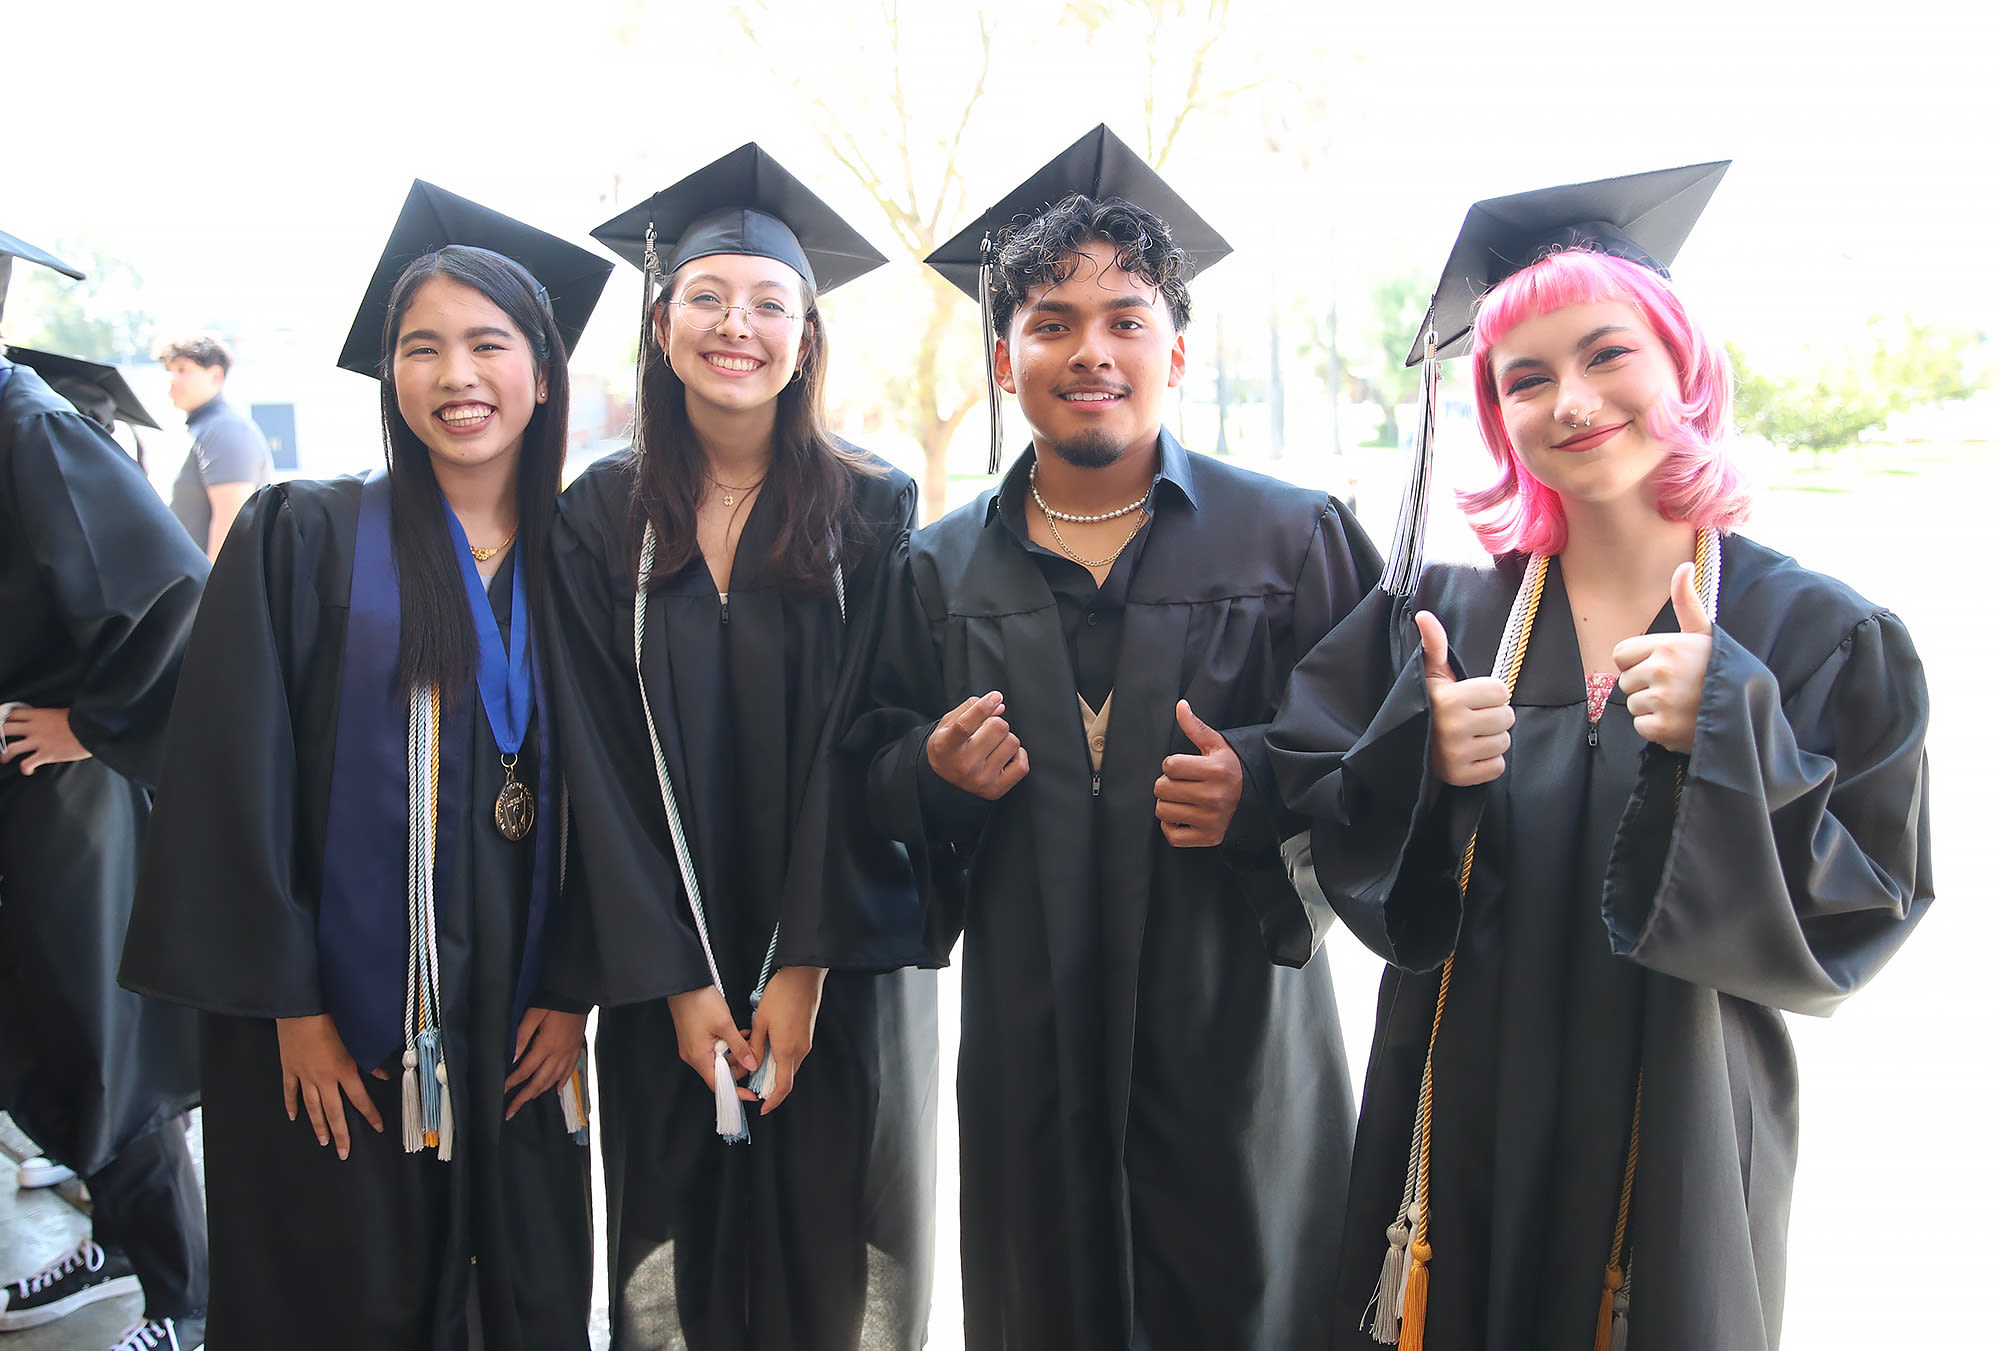 Newport-Mesa enters grad season with ceremonies for Early College, STEP students